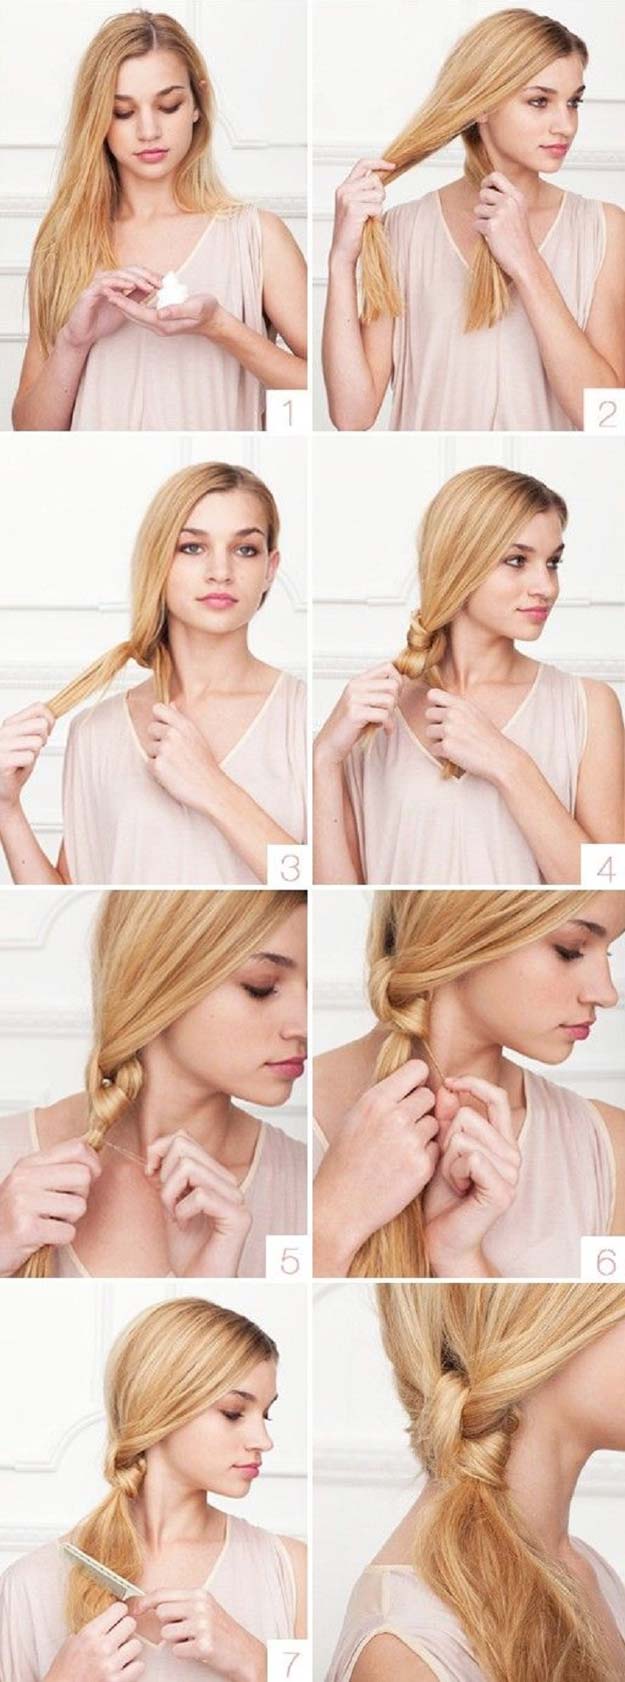 Best Hairstyles for Long Hair - Knot Your Average Ponytail - Step by Step Tutorials for Easy Curls, Updo, Half Up, Braids and Lazy Girl Looks. Prom Ideas, Special Occasion Hair and Braiding Instructions for Teens, Teenagers and Adults, Women and Girls 